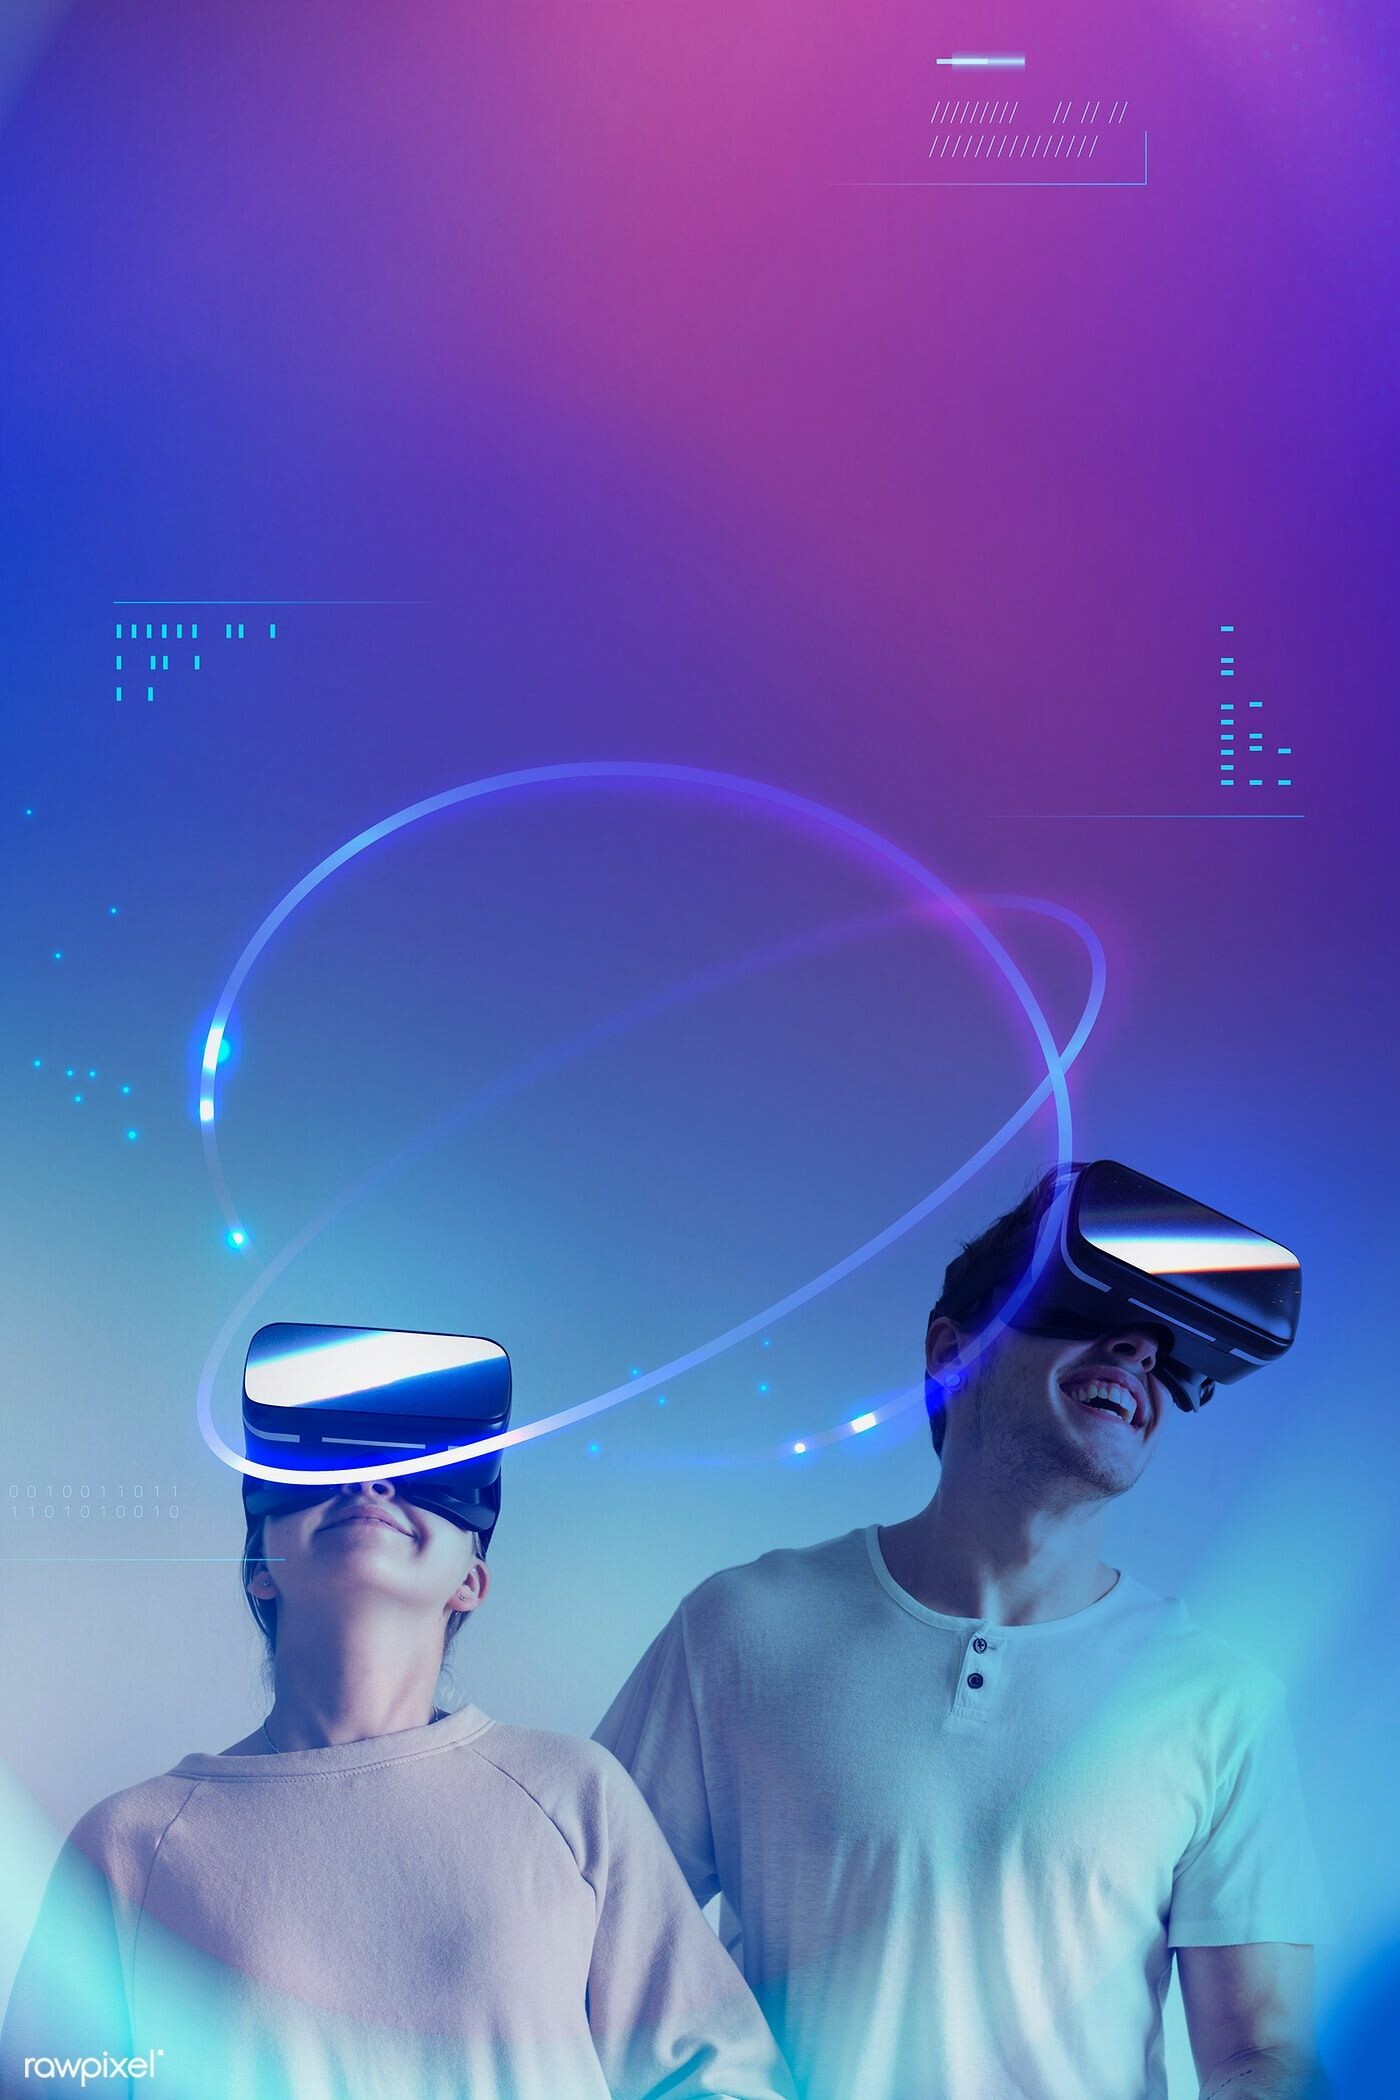 Metaverse 101, Virtual reality art, VR headset experience, Happy couple in metaverse, 1400x2100 HD Handy